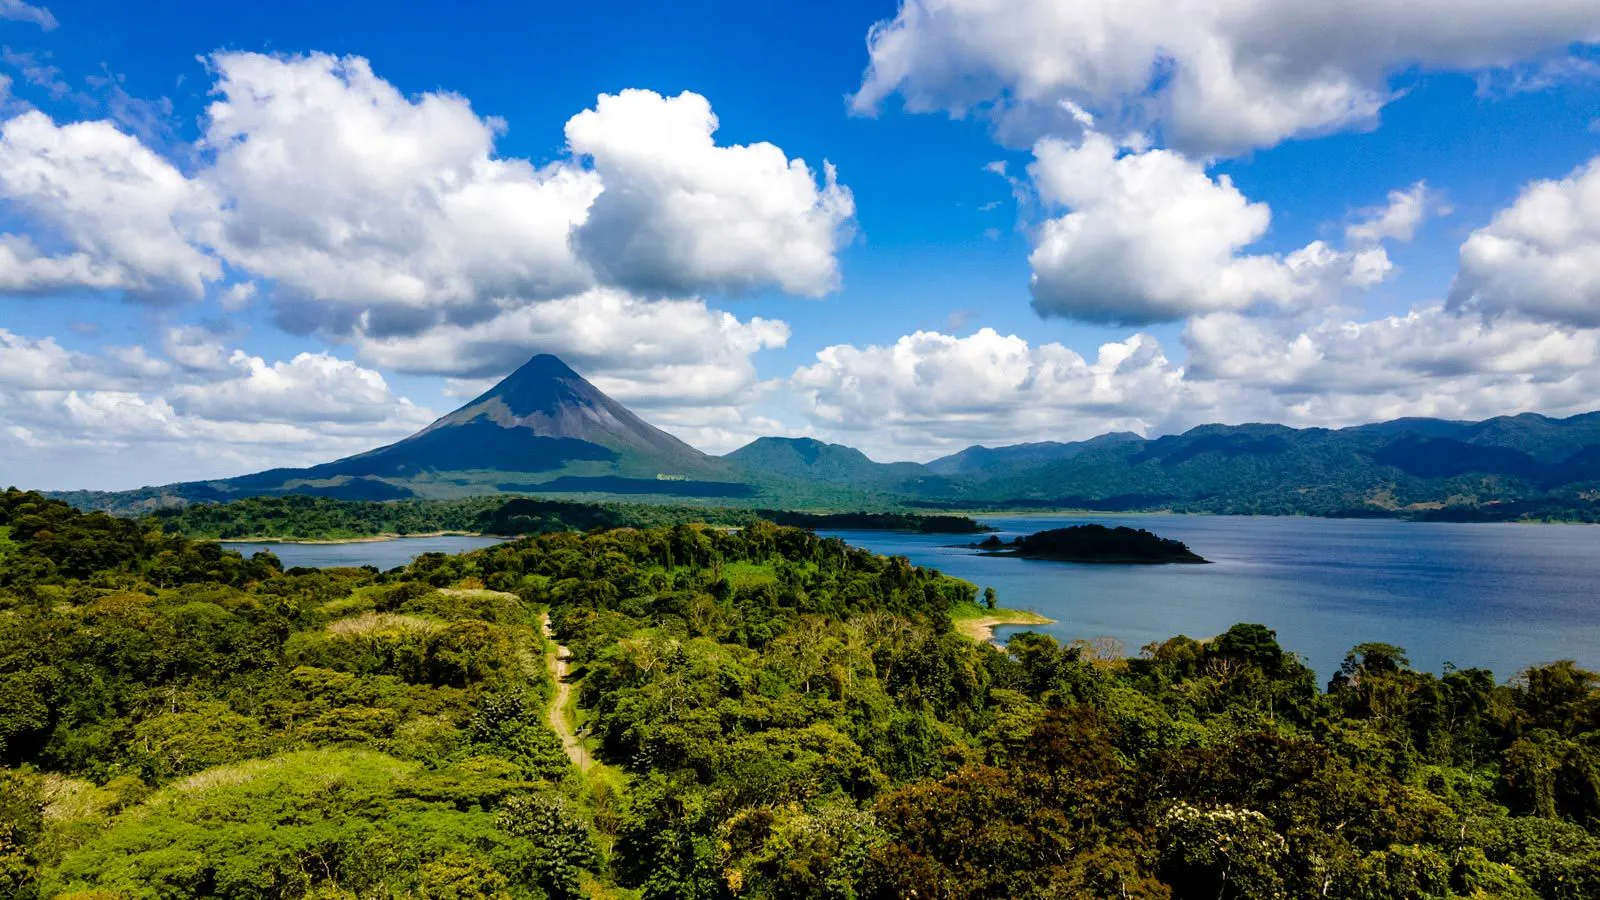 The Costa Rican landscape with Arenal volcano and rainforest